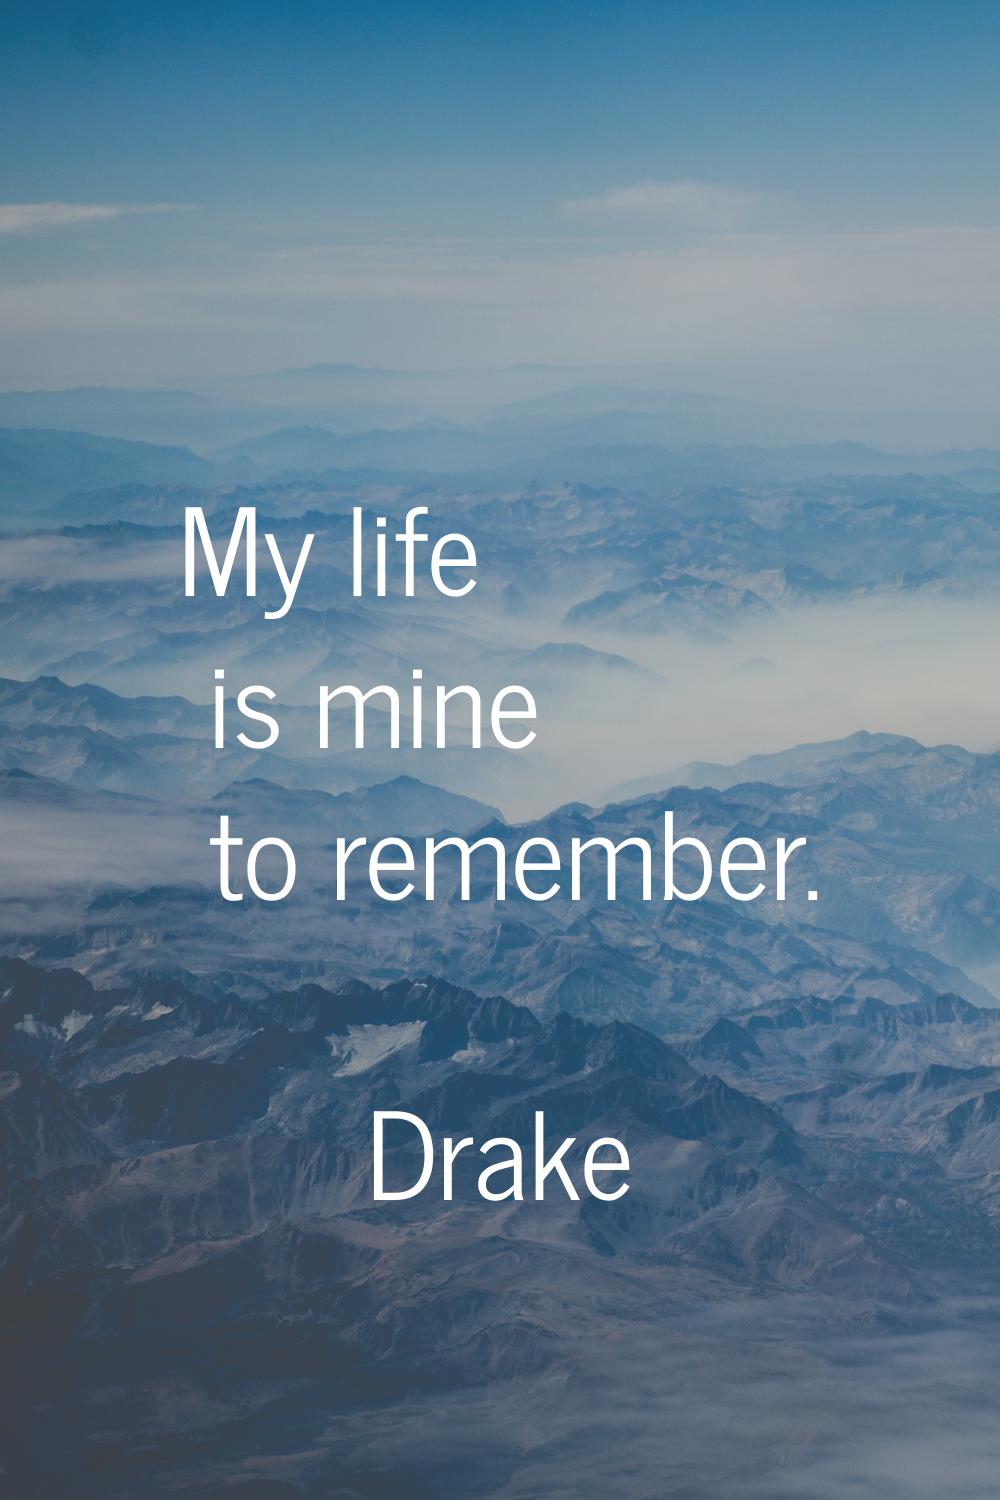 My life is mine to remember.